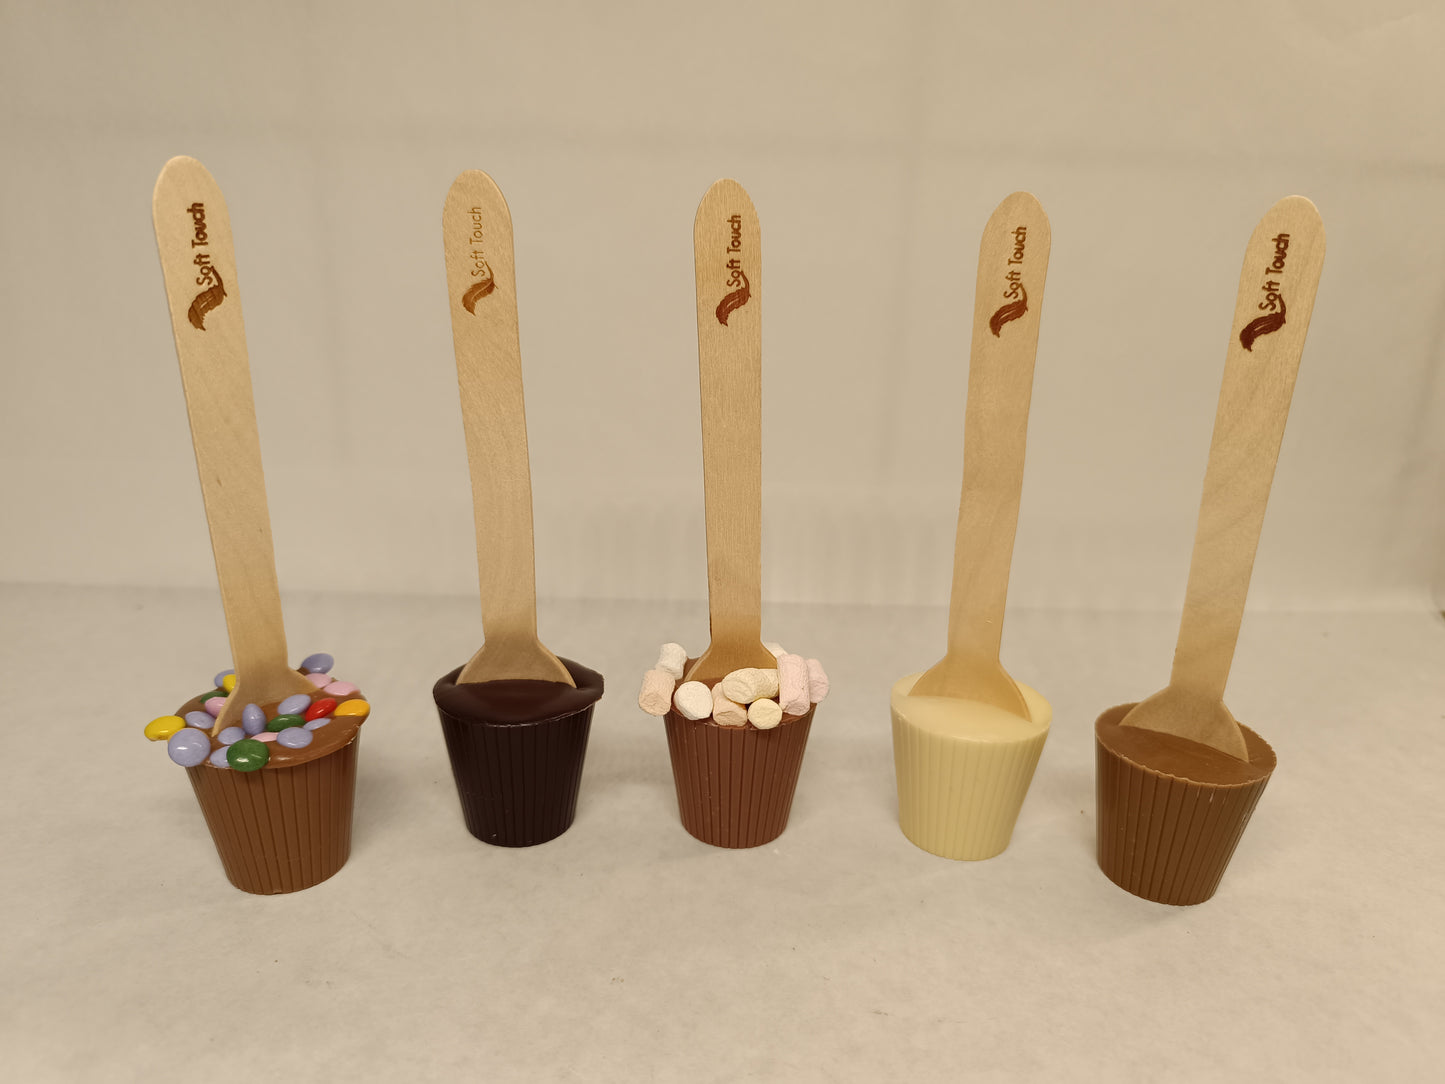 Chocolate spoons for hot chocolate